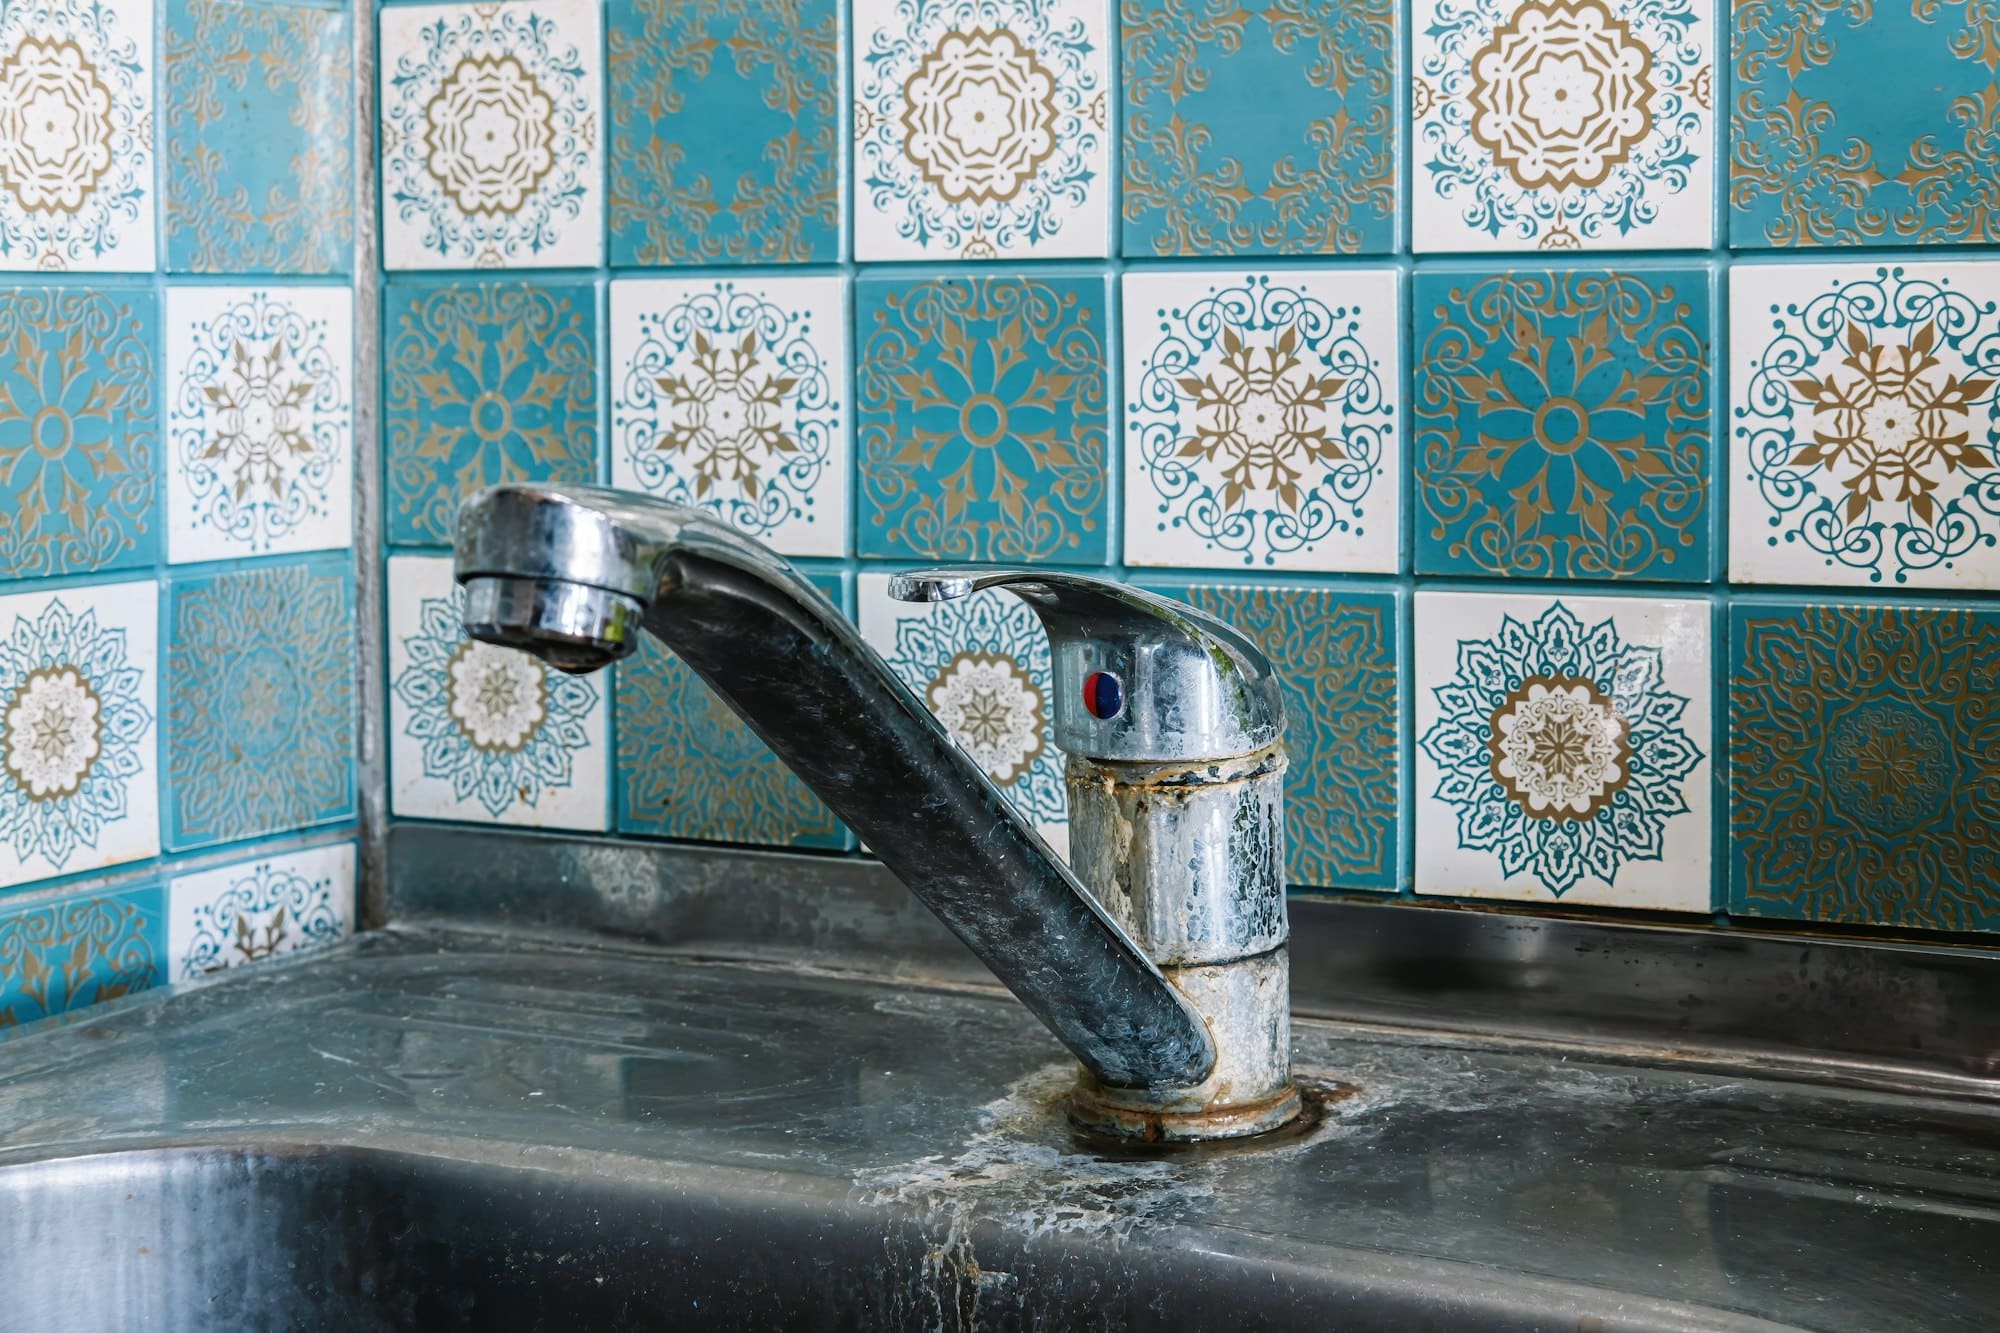 Close-up of an old-fashioned metal faucet over a stainless steel sink, in front of a decorative blue and white tile backsplash with intricate patterns, showing subtle signs of hard water stains.